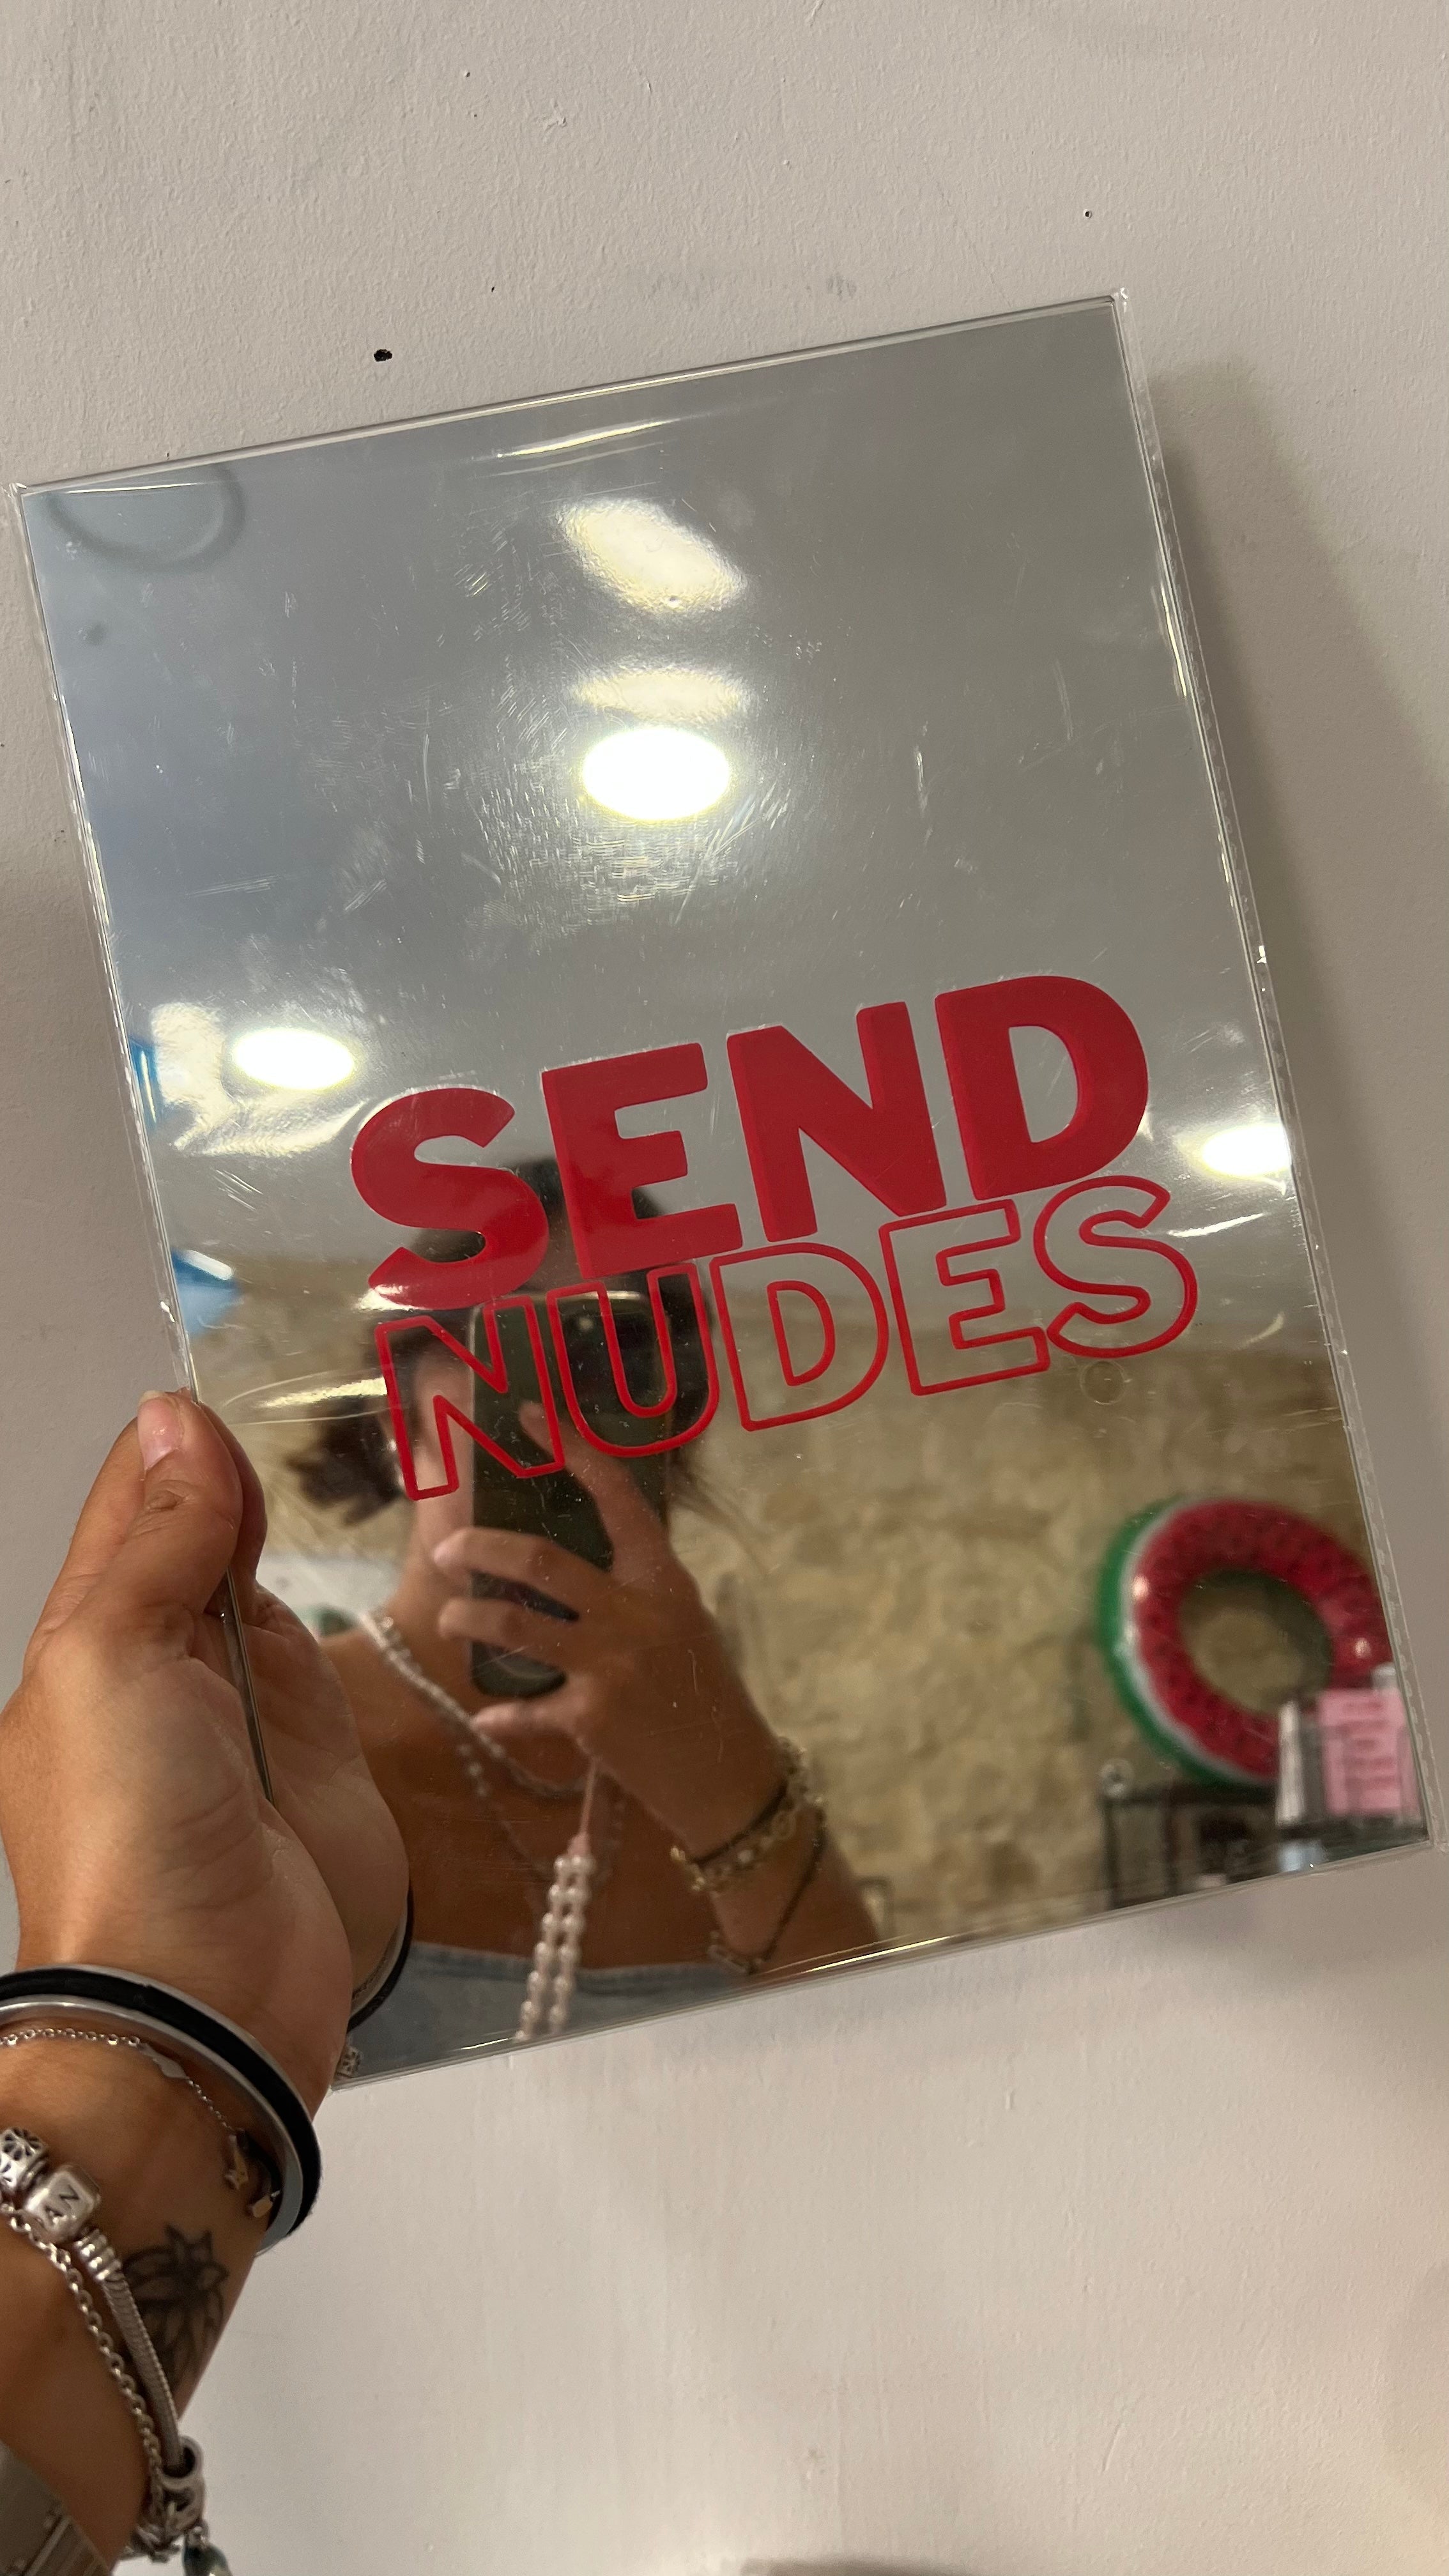 A4 handmade mirror featuring the fun phrase 'Send nudes' in bold red lettering.